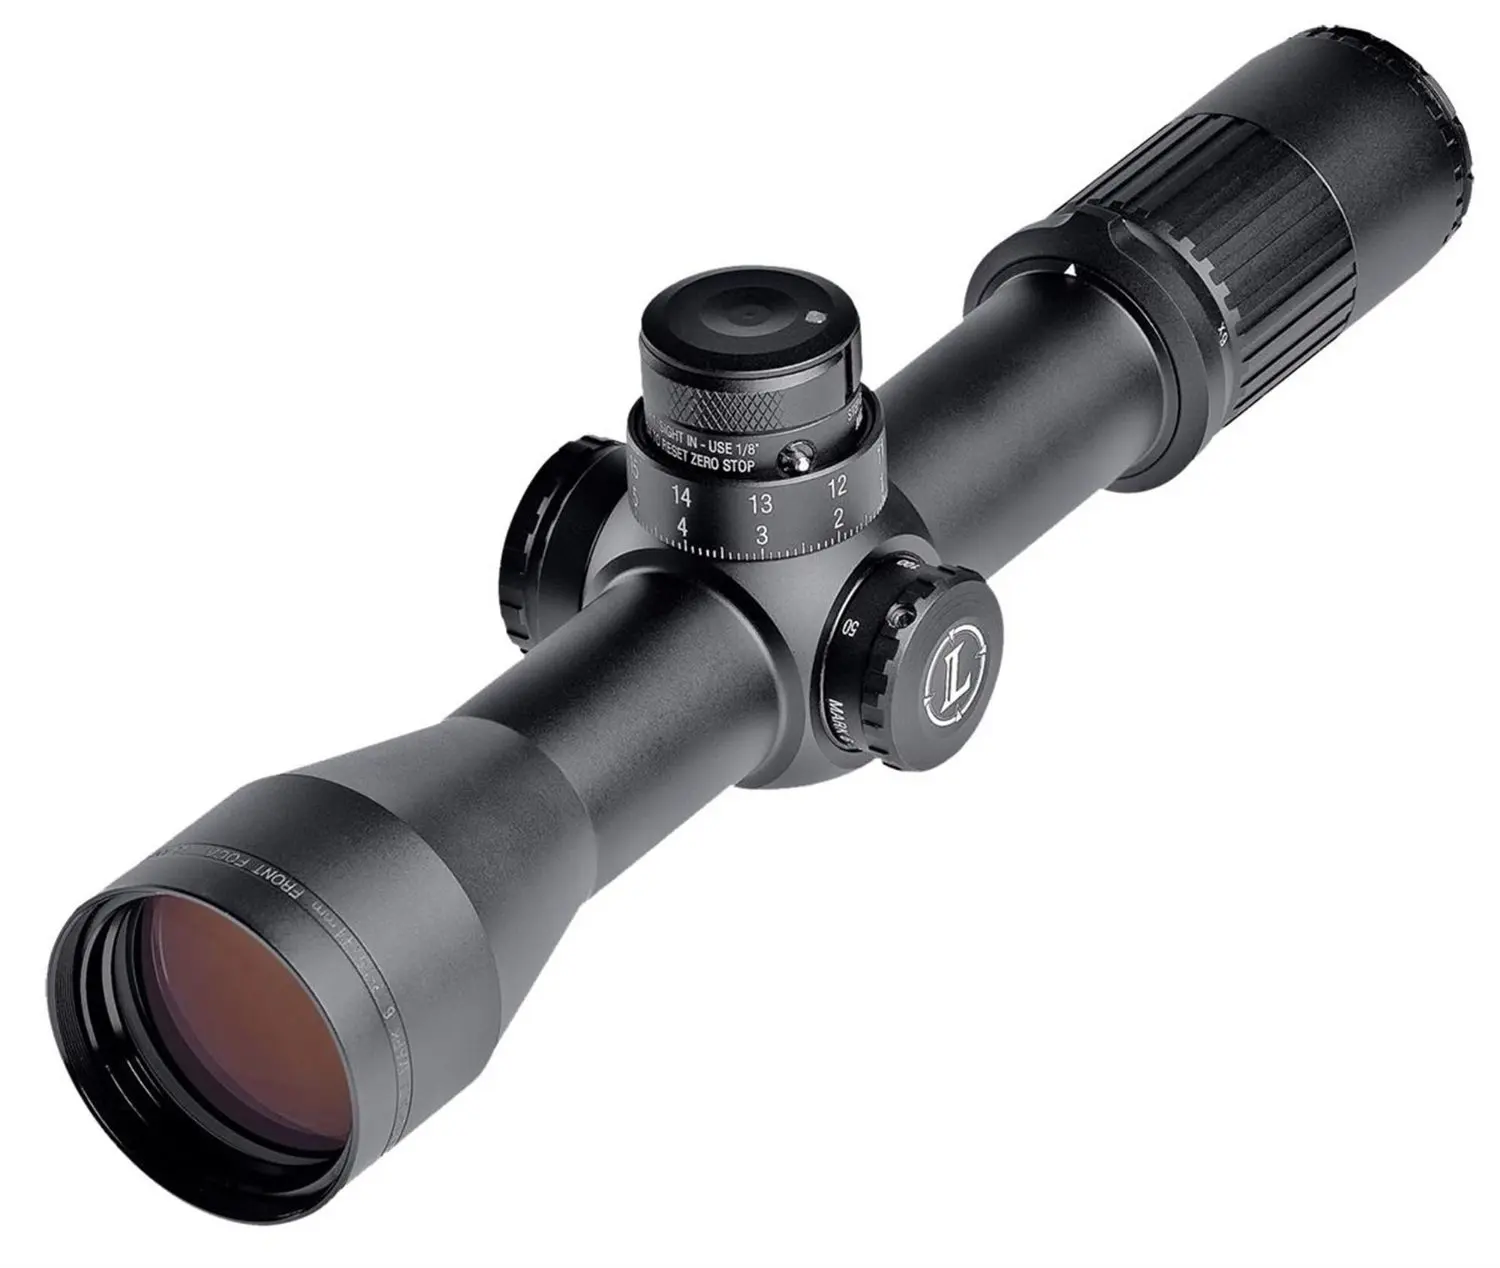 Ruger M77 Scope Mount Chart